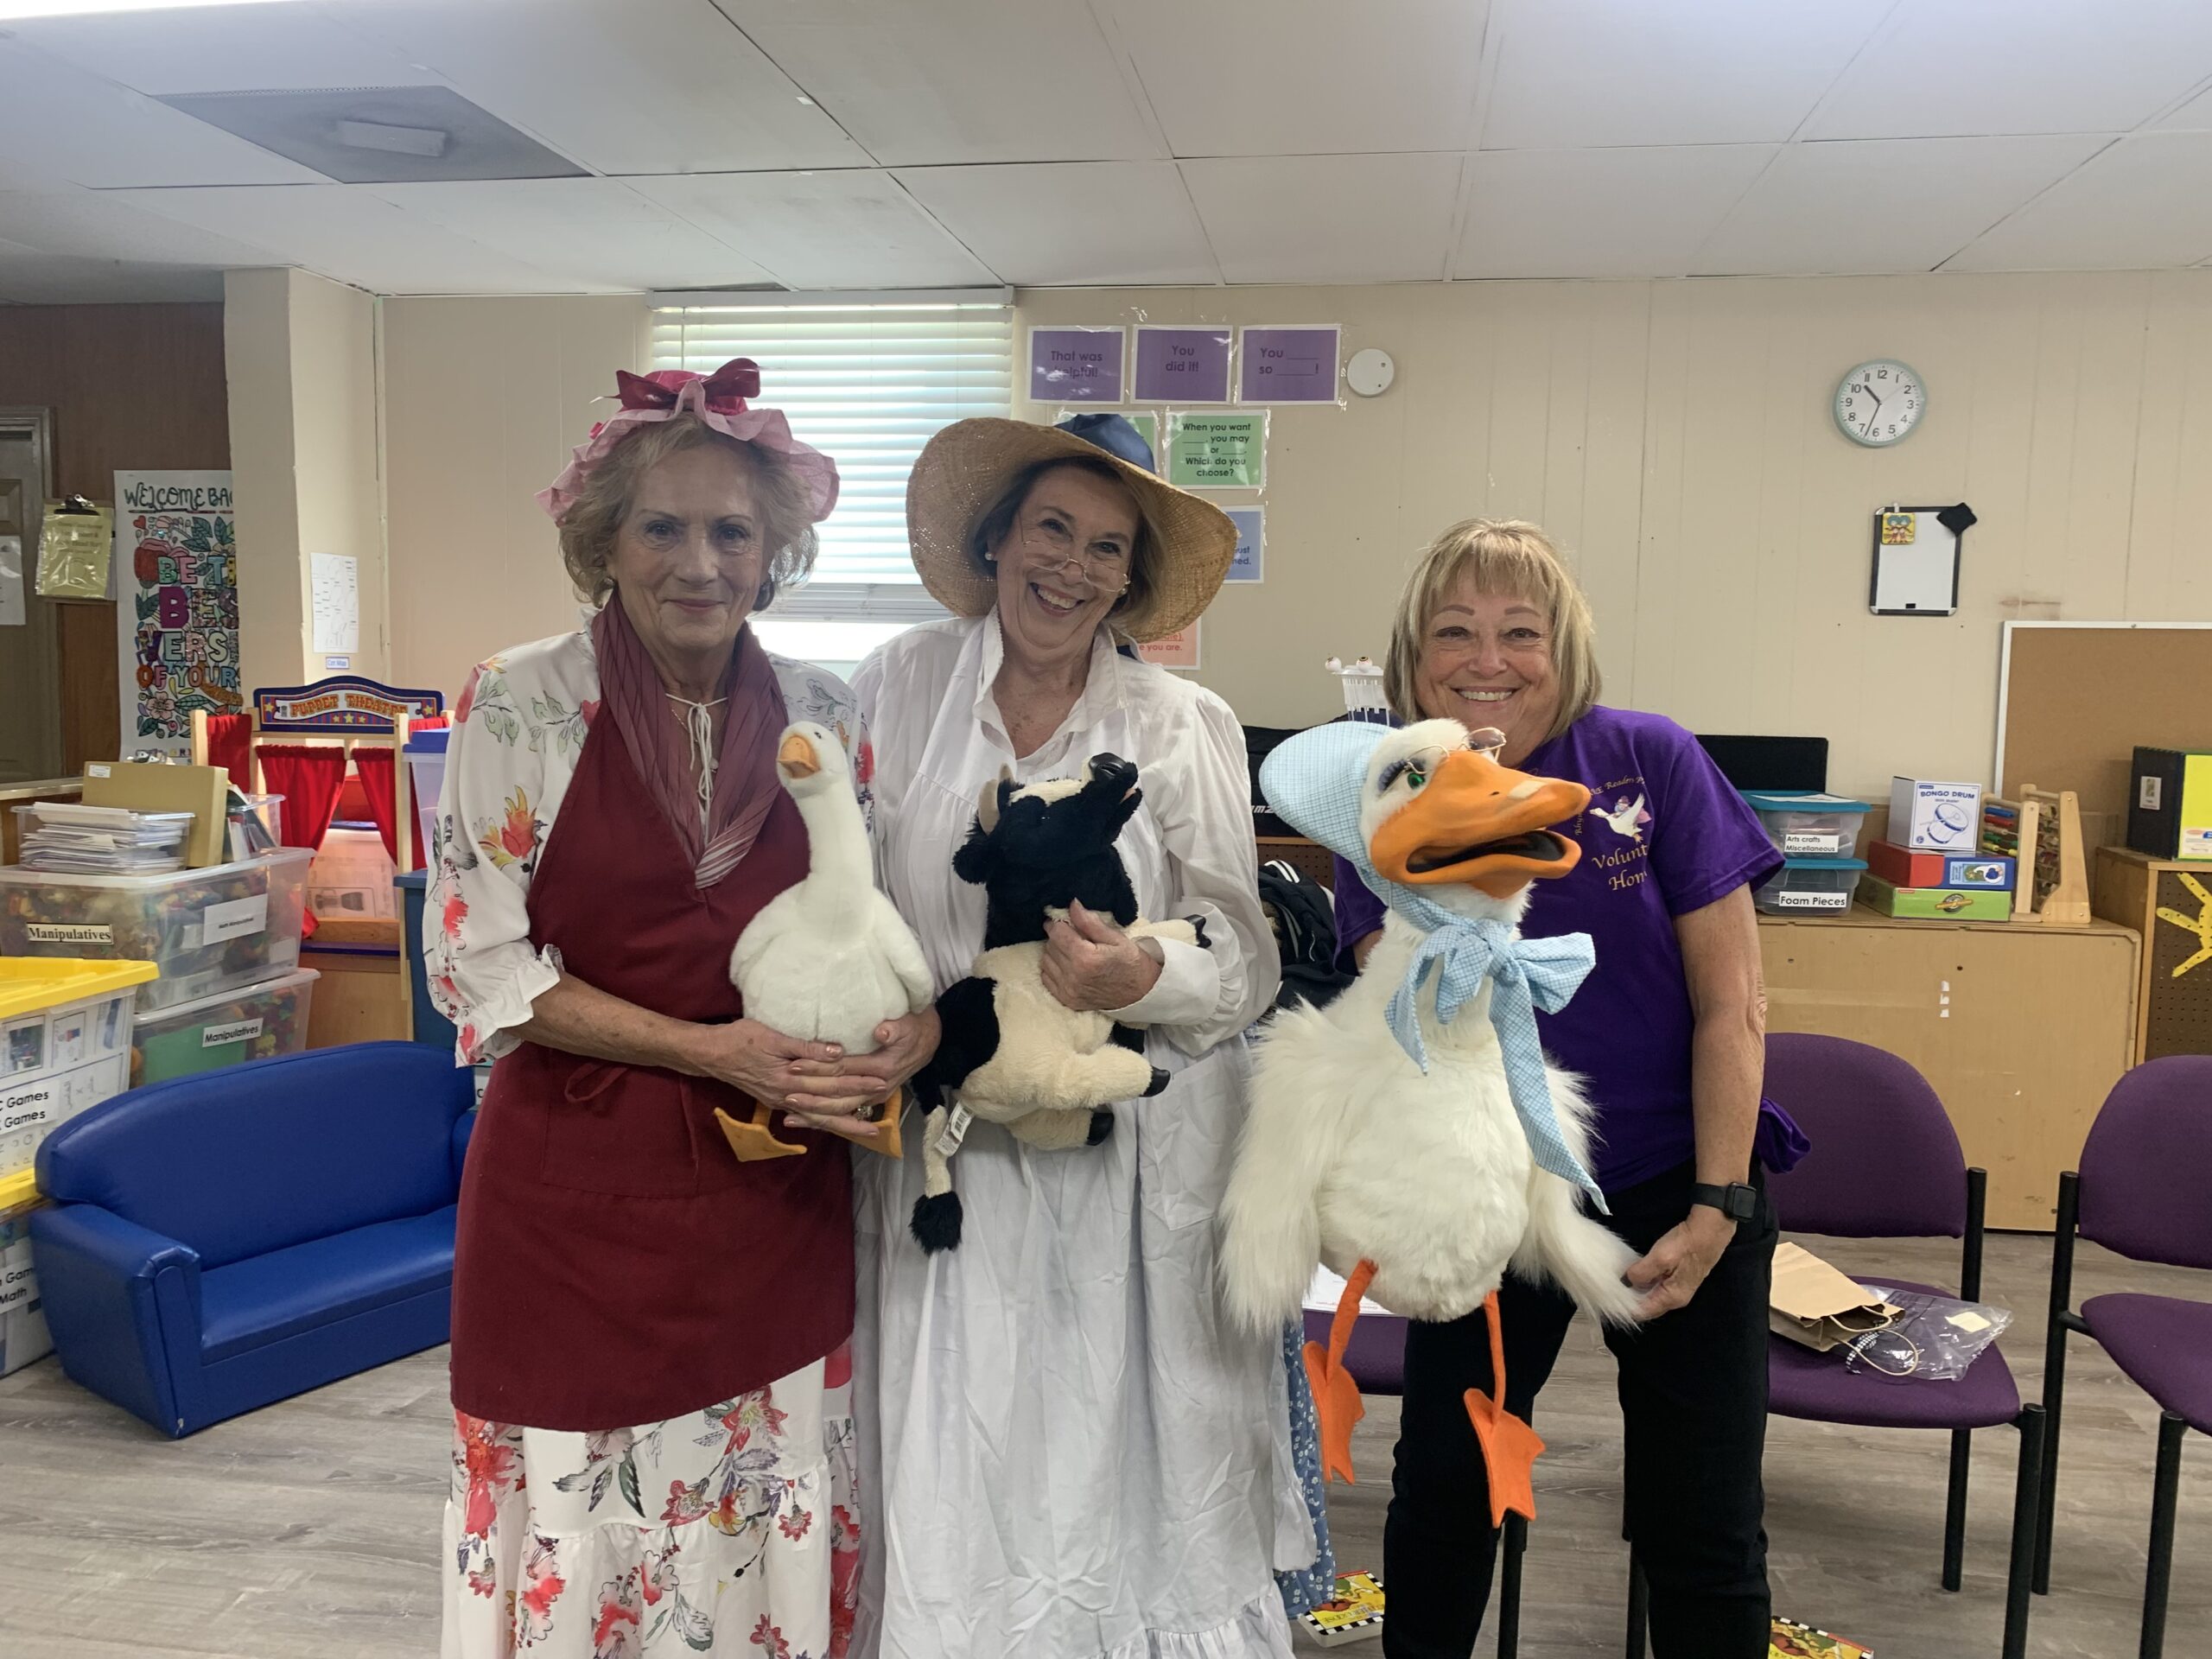 Mother Goose and Friends